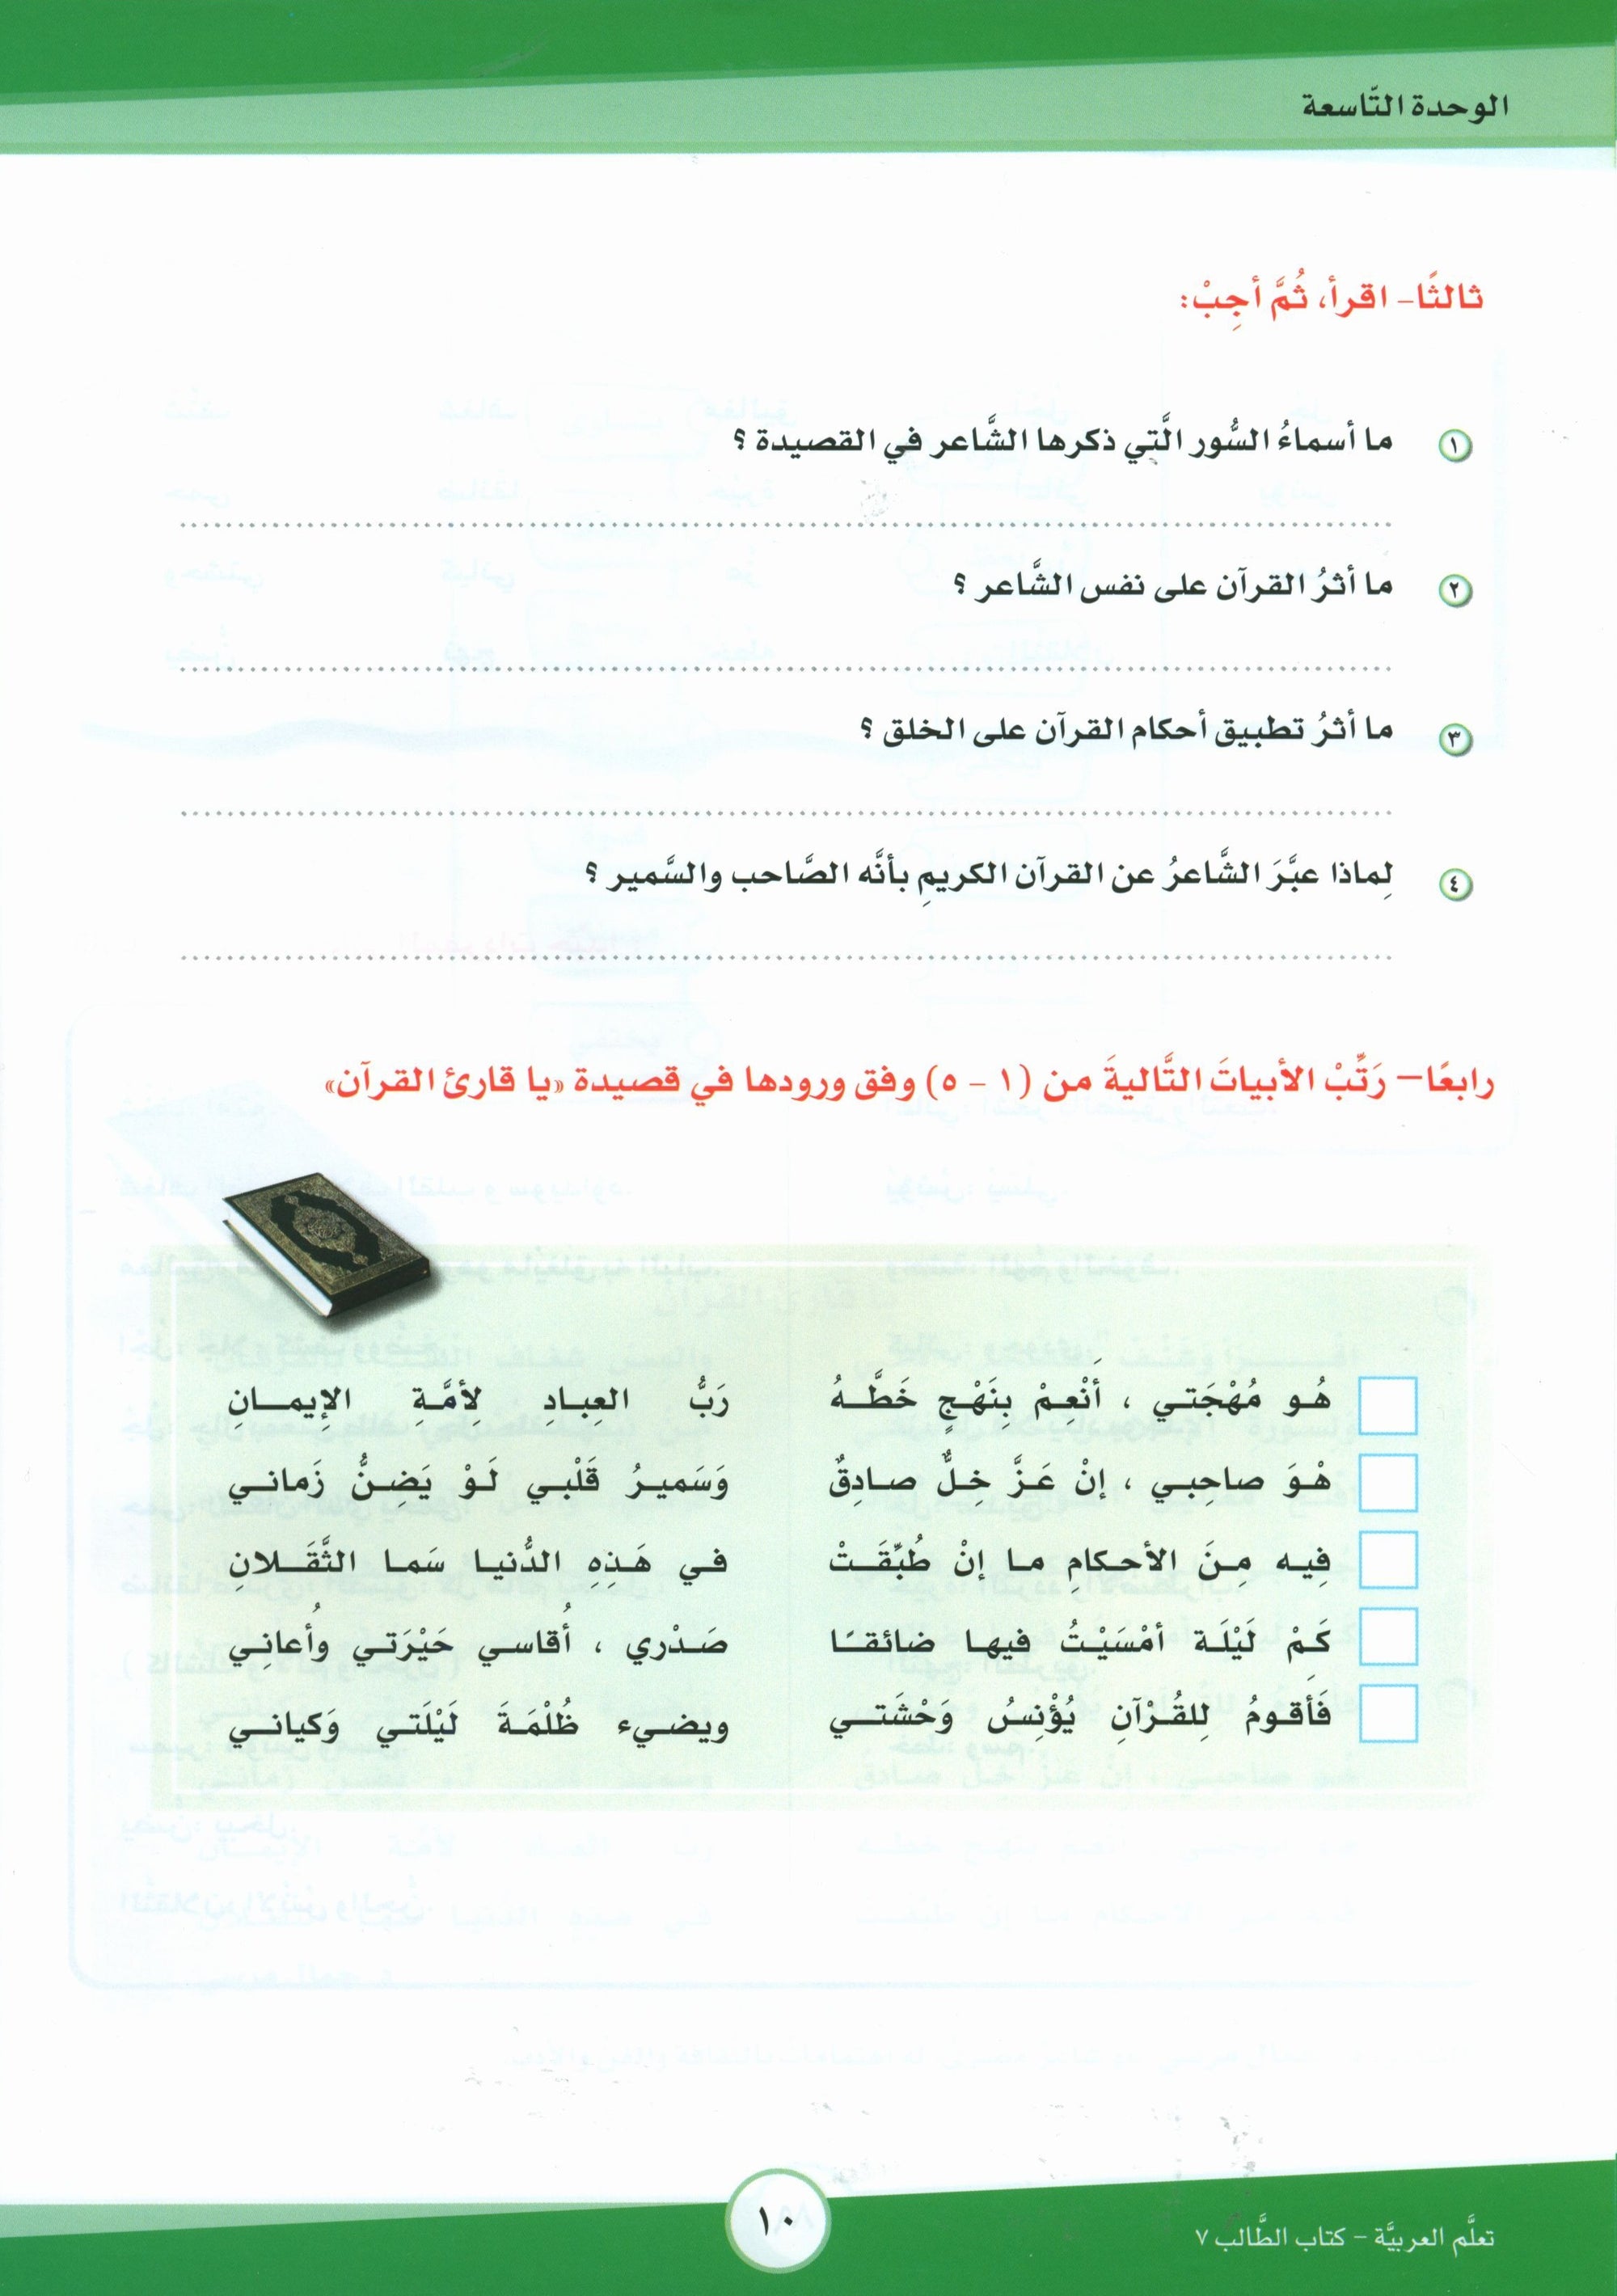 ICO Learn Arabic Textbook: Level 6, Part 2 (With Access Code) تعلم العربية